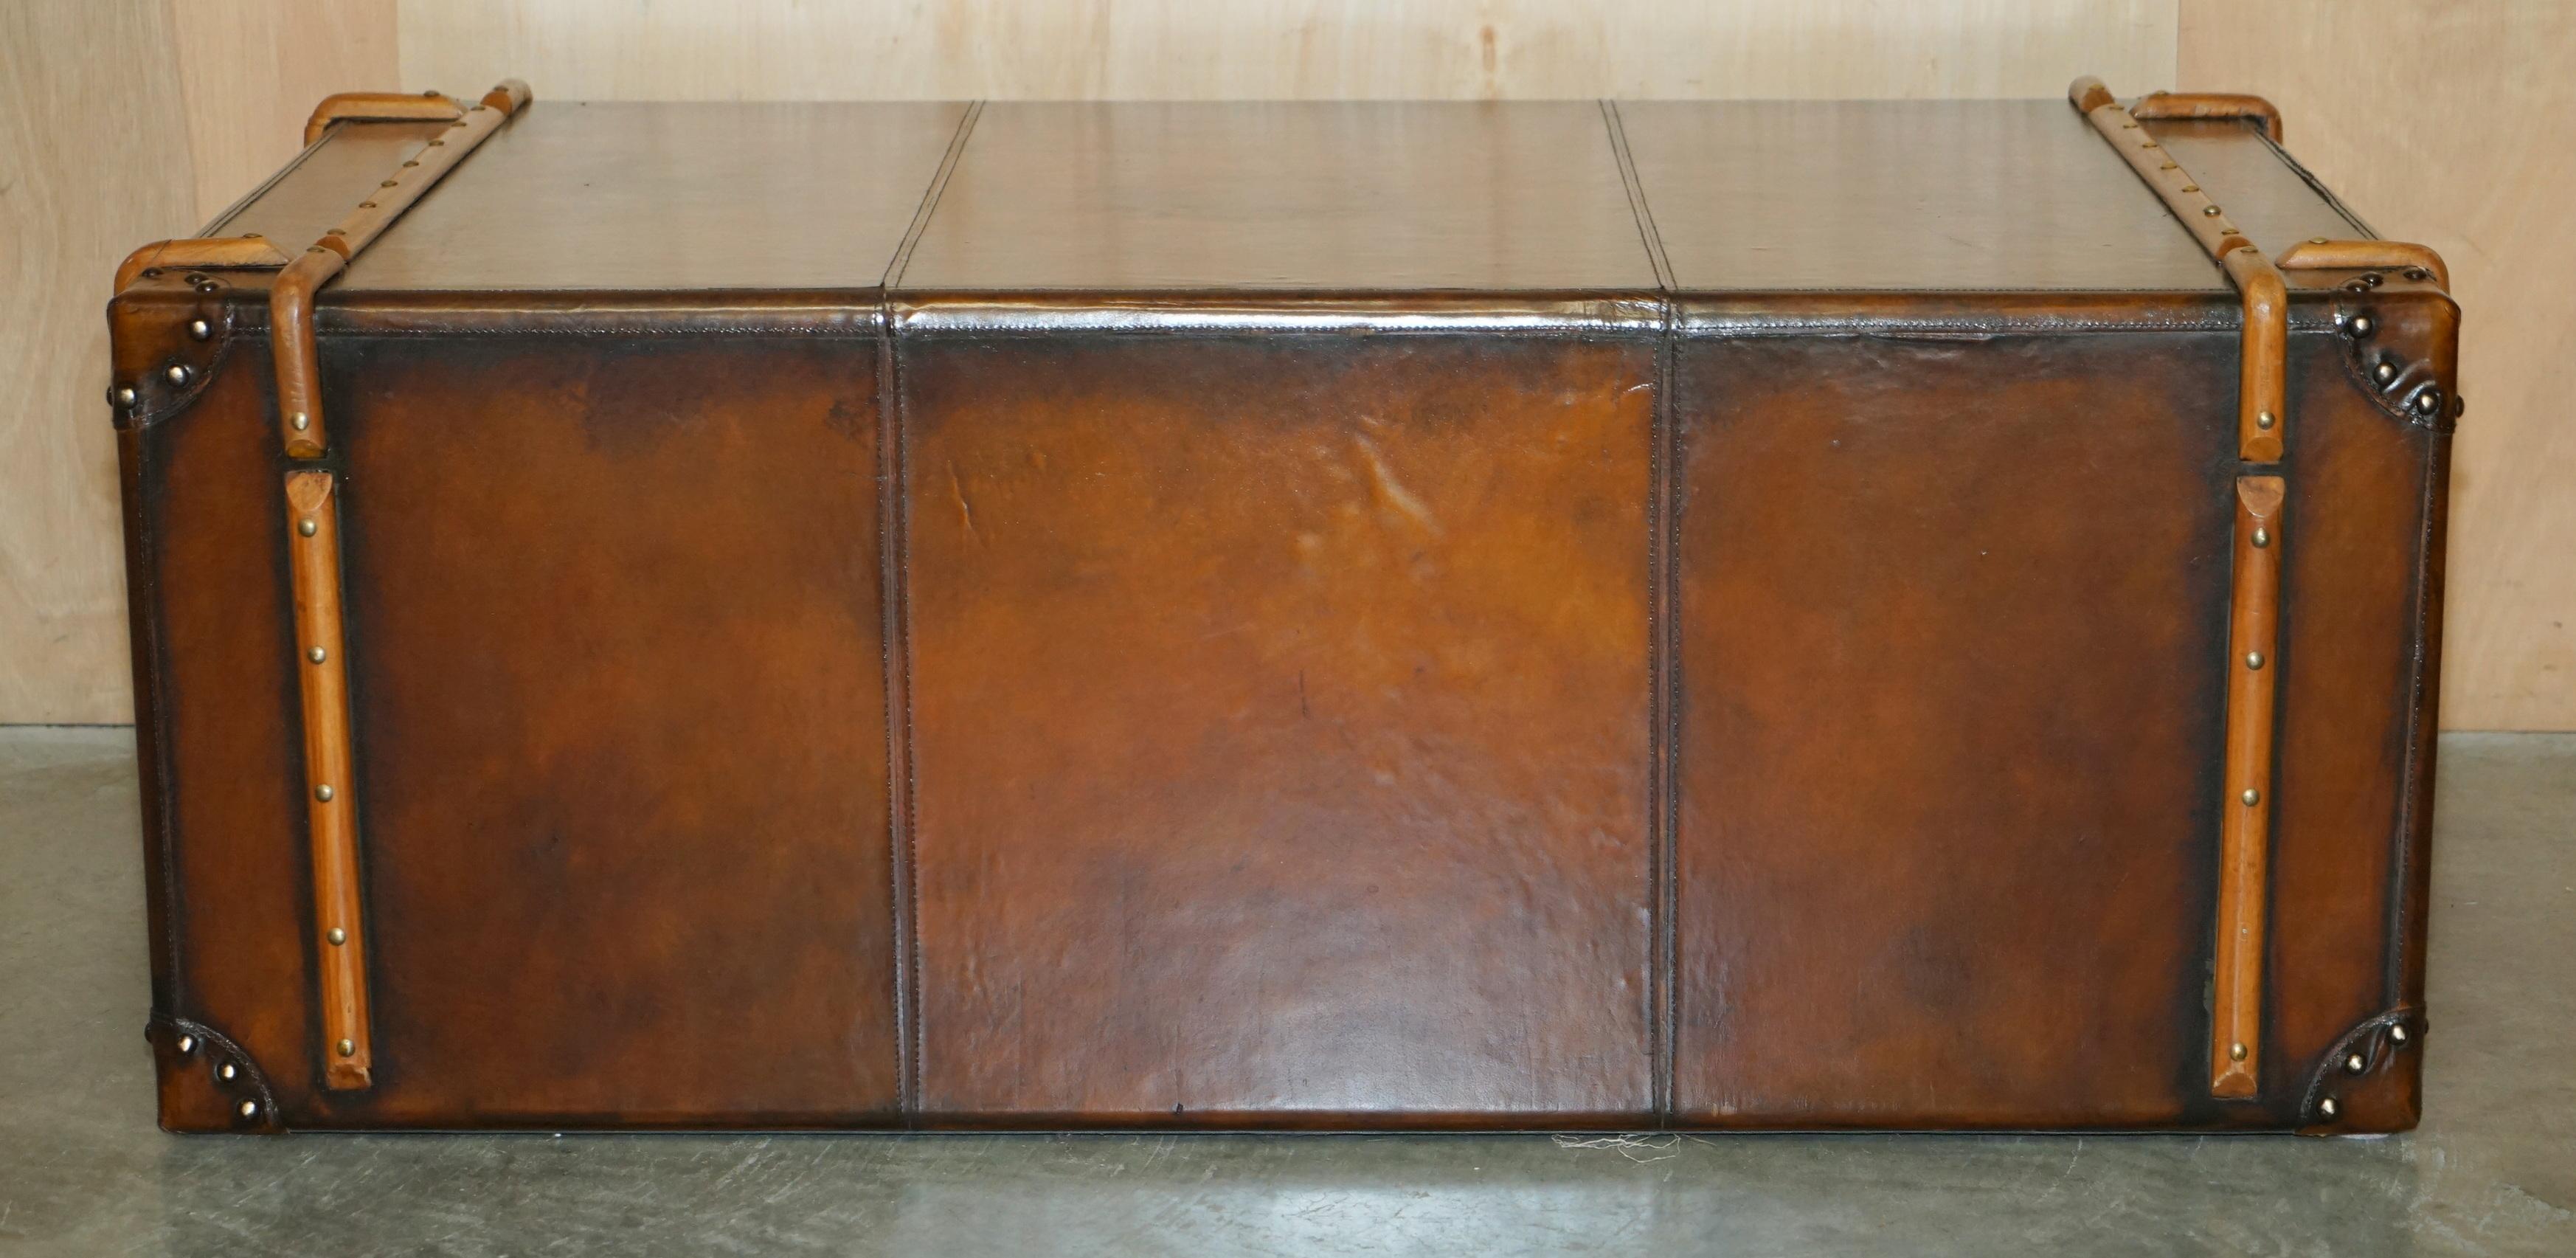 FULLY RESTORED ViNTAGE HAND DYED BROWN LEATHER STEAMER TRUNK COFFEE TABLE DRAWER 8